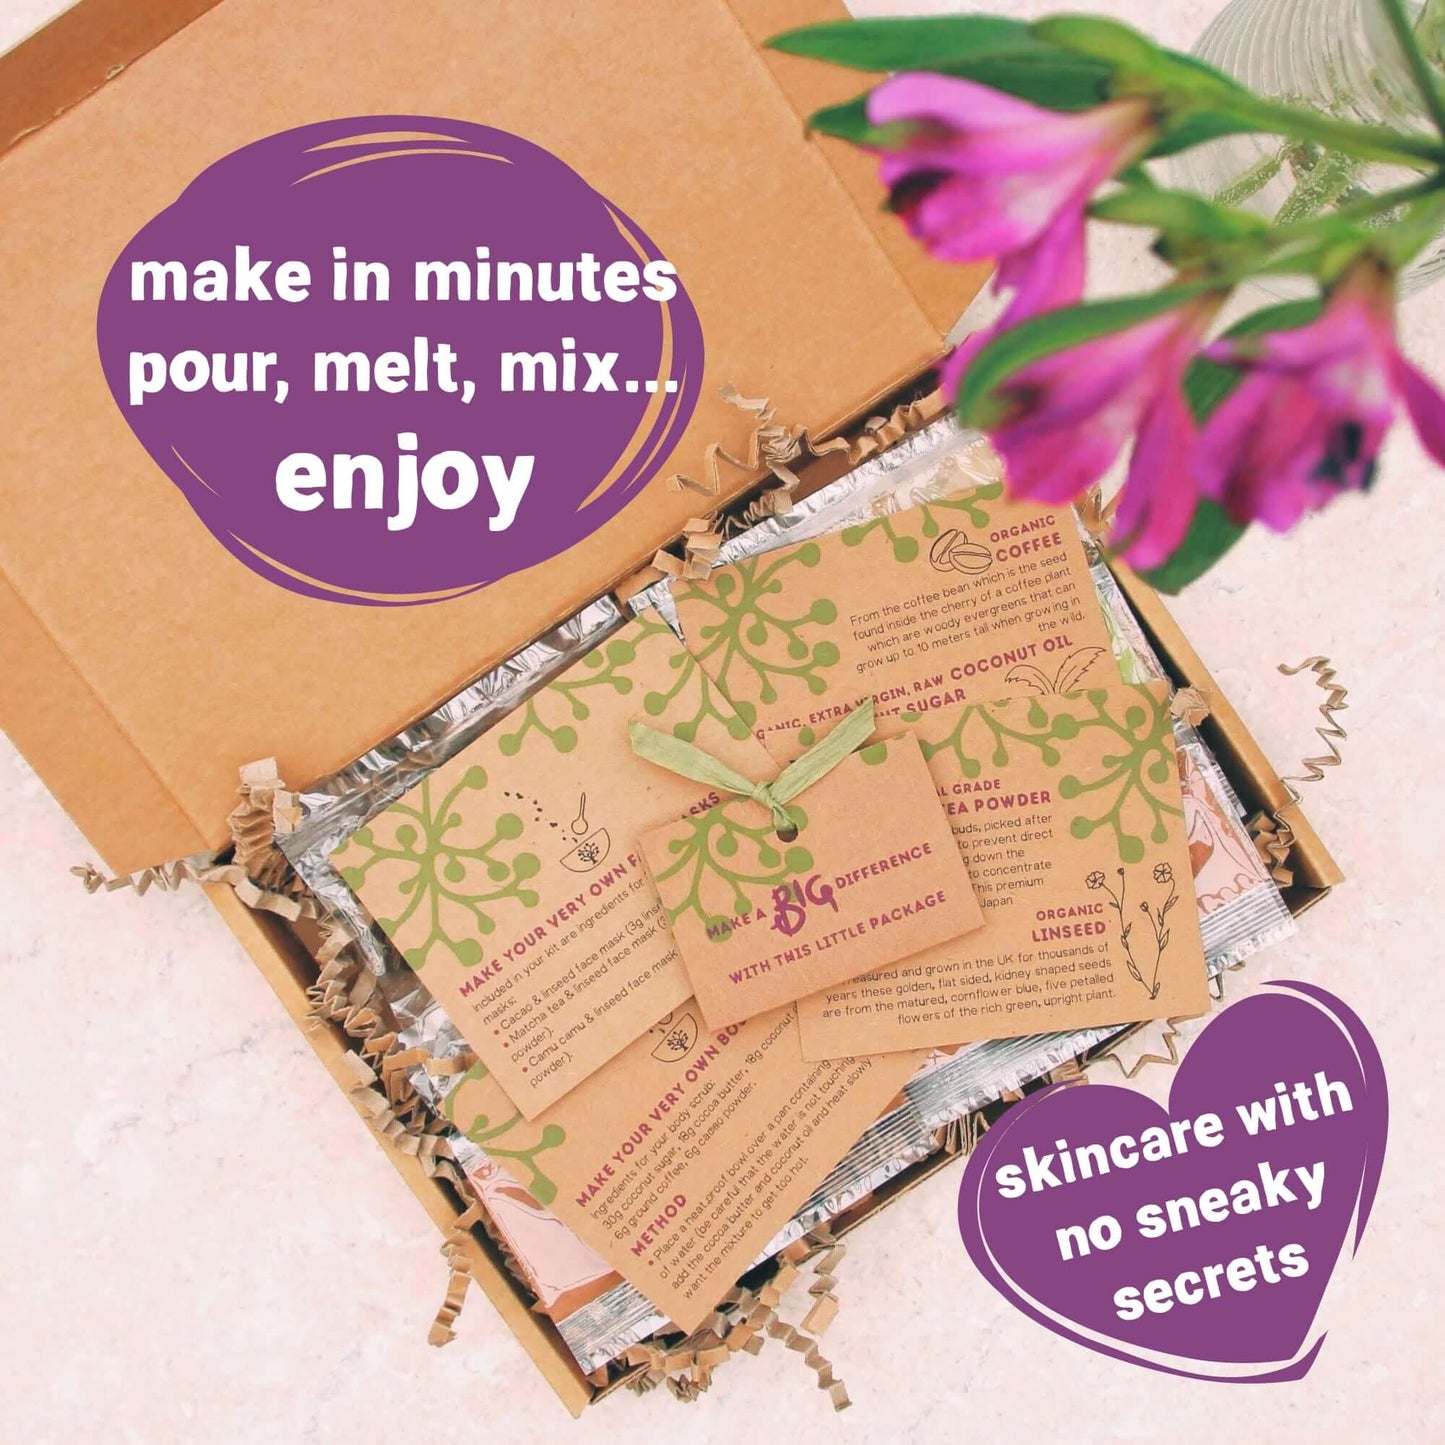 make your own letterbox gift so your friend can make skincare with no sneaky secrets